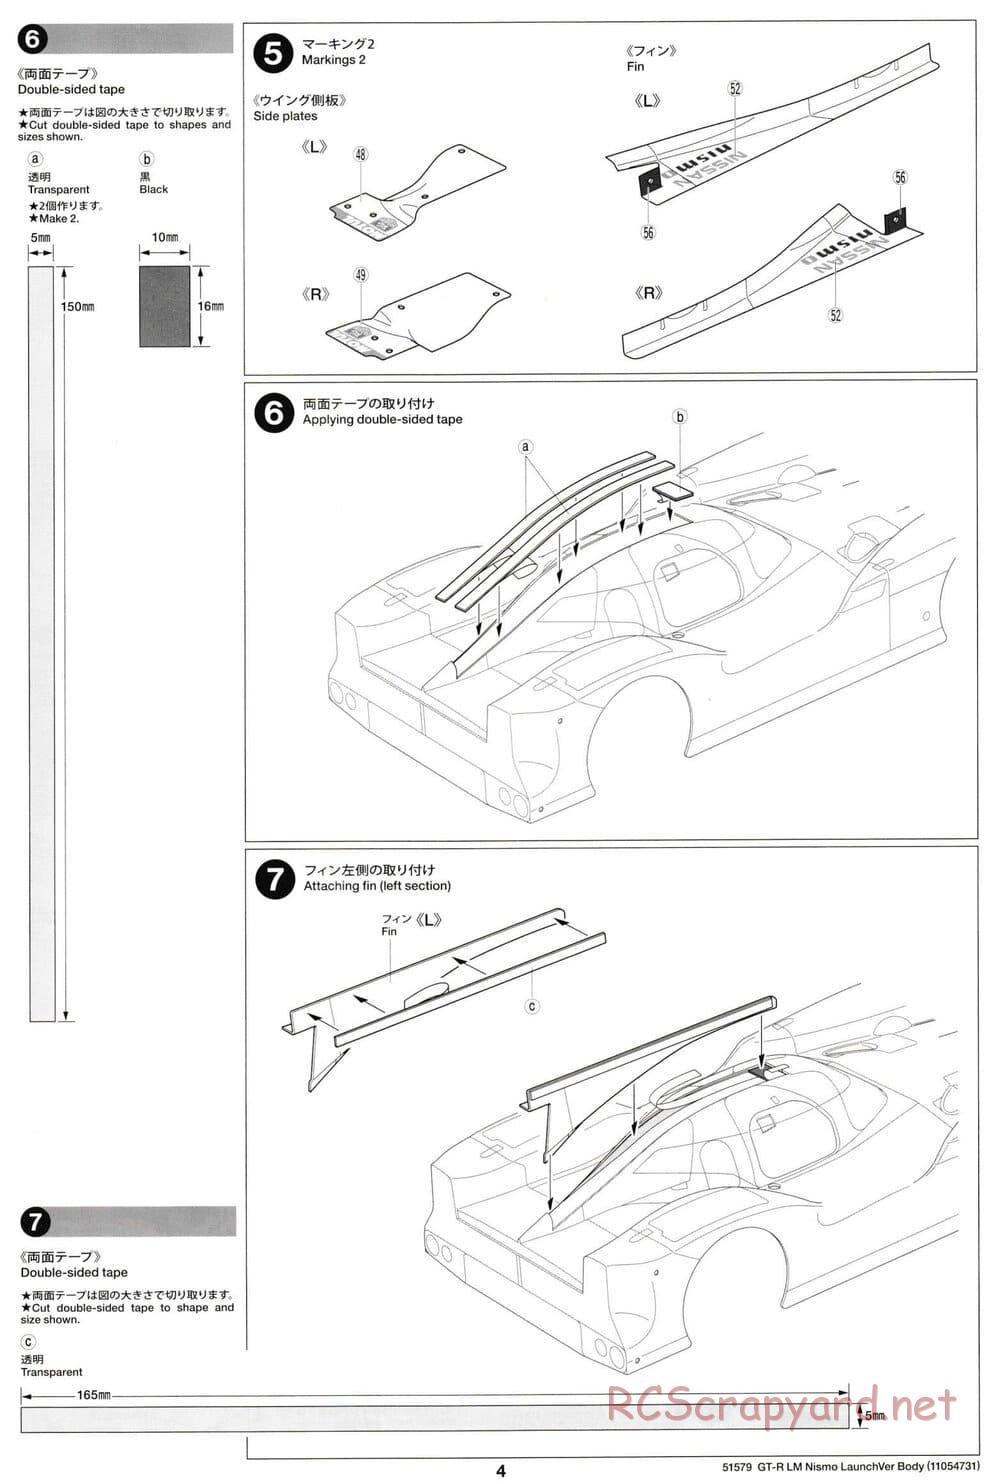 Tamiya - Nissan GT-R LM Nismo Launch Version - F103GT Chassis - Body Manual - Page 4